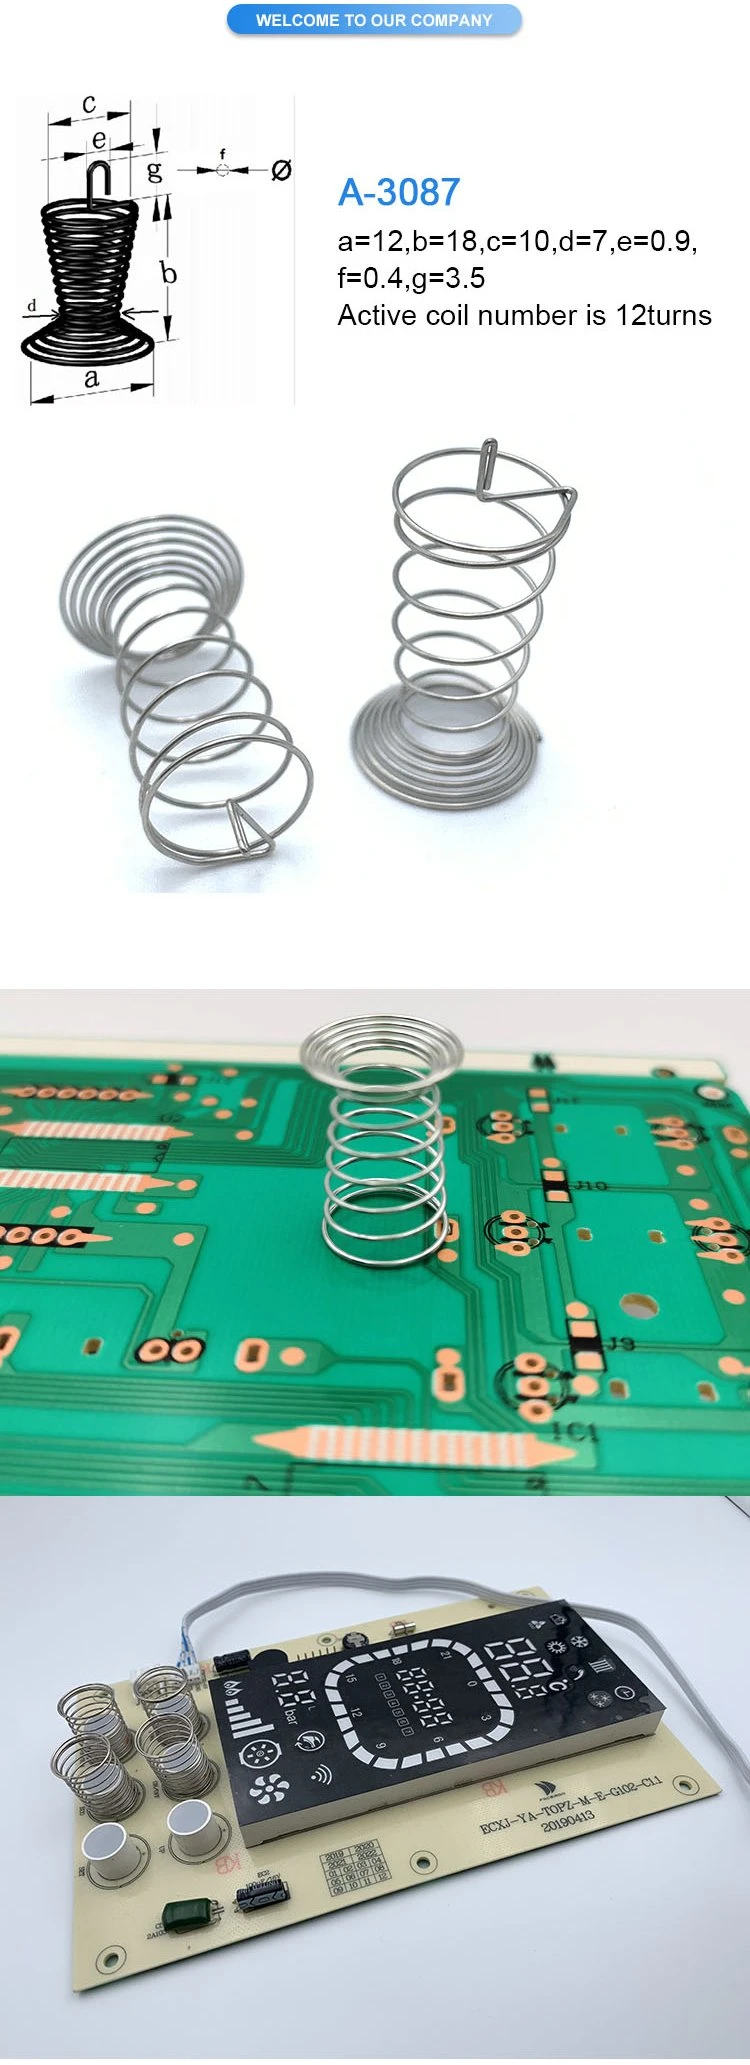 Torsion Spring Machine Slinky Toy with Factory Machine